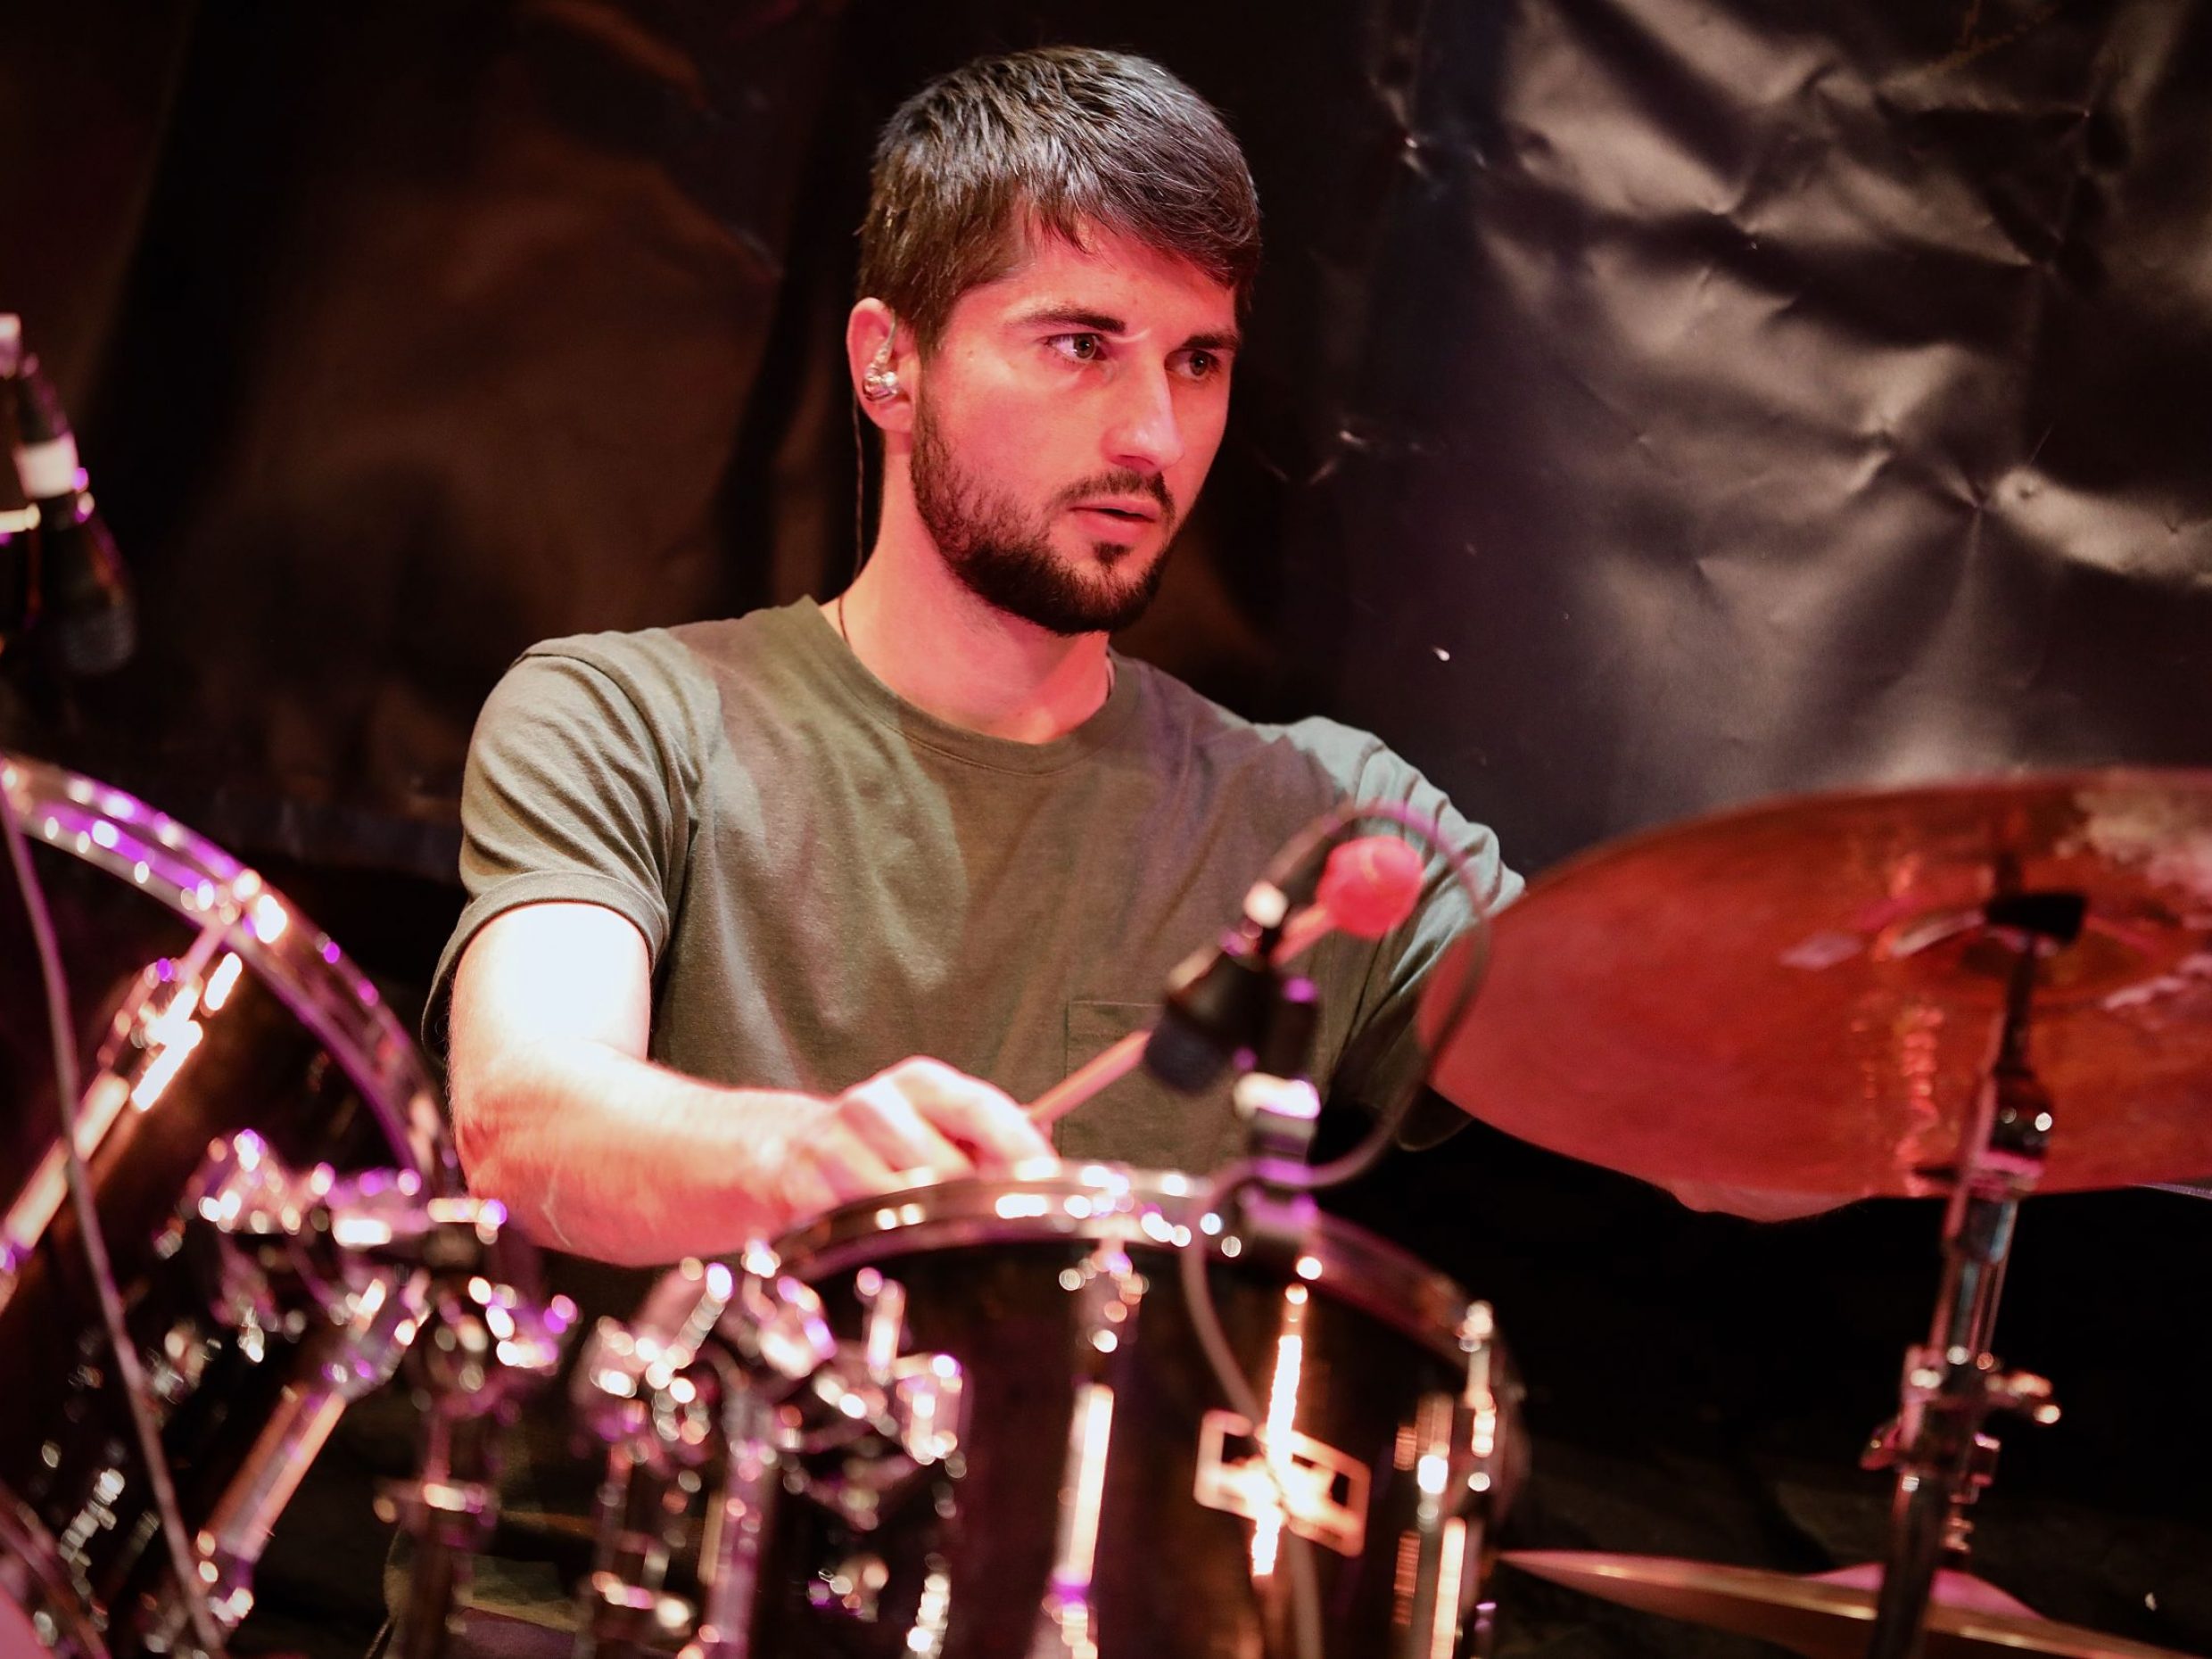 ANDREAS GRÜTER - DRUMS